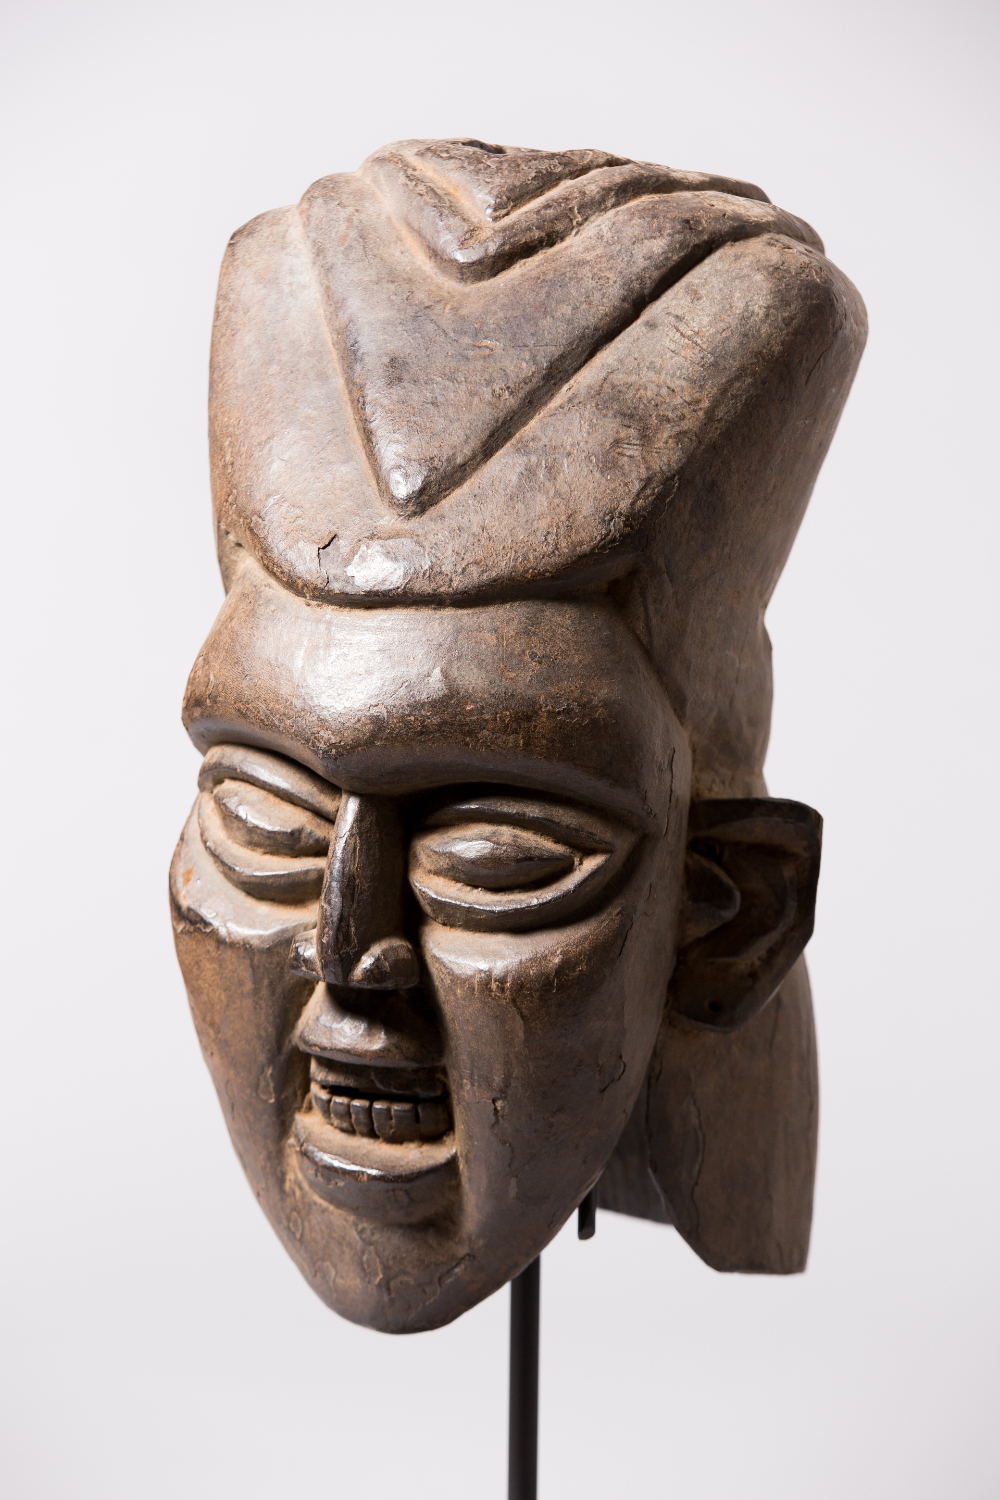 thumbnail of Commemorative Figure from Northwestern Grassfields: Kambe. medium: Wood. date: early 19th century